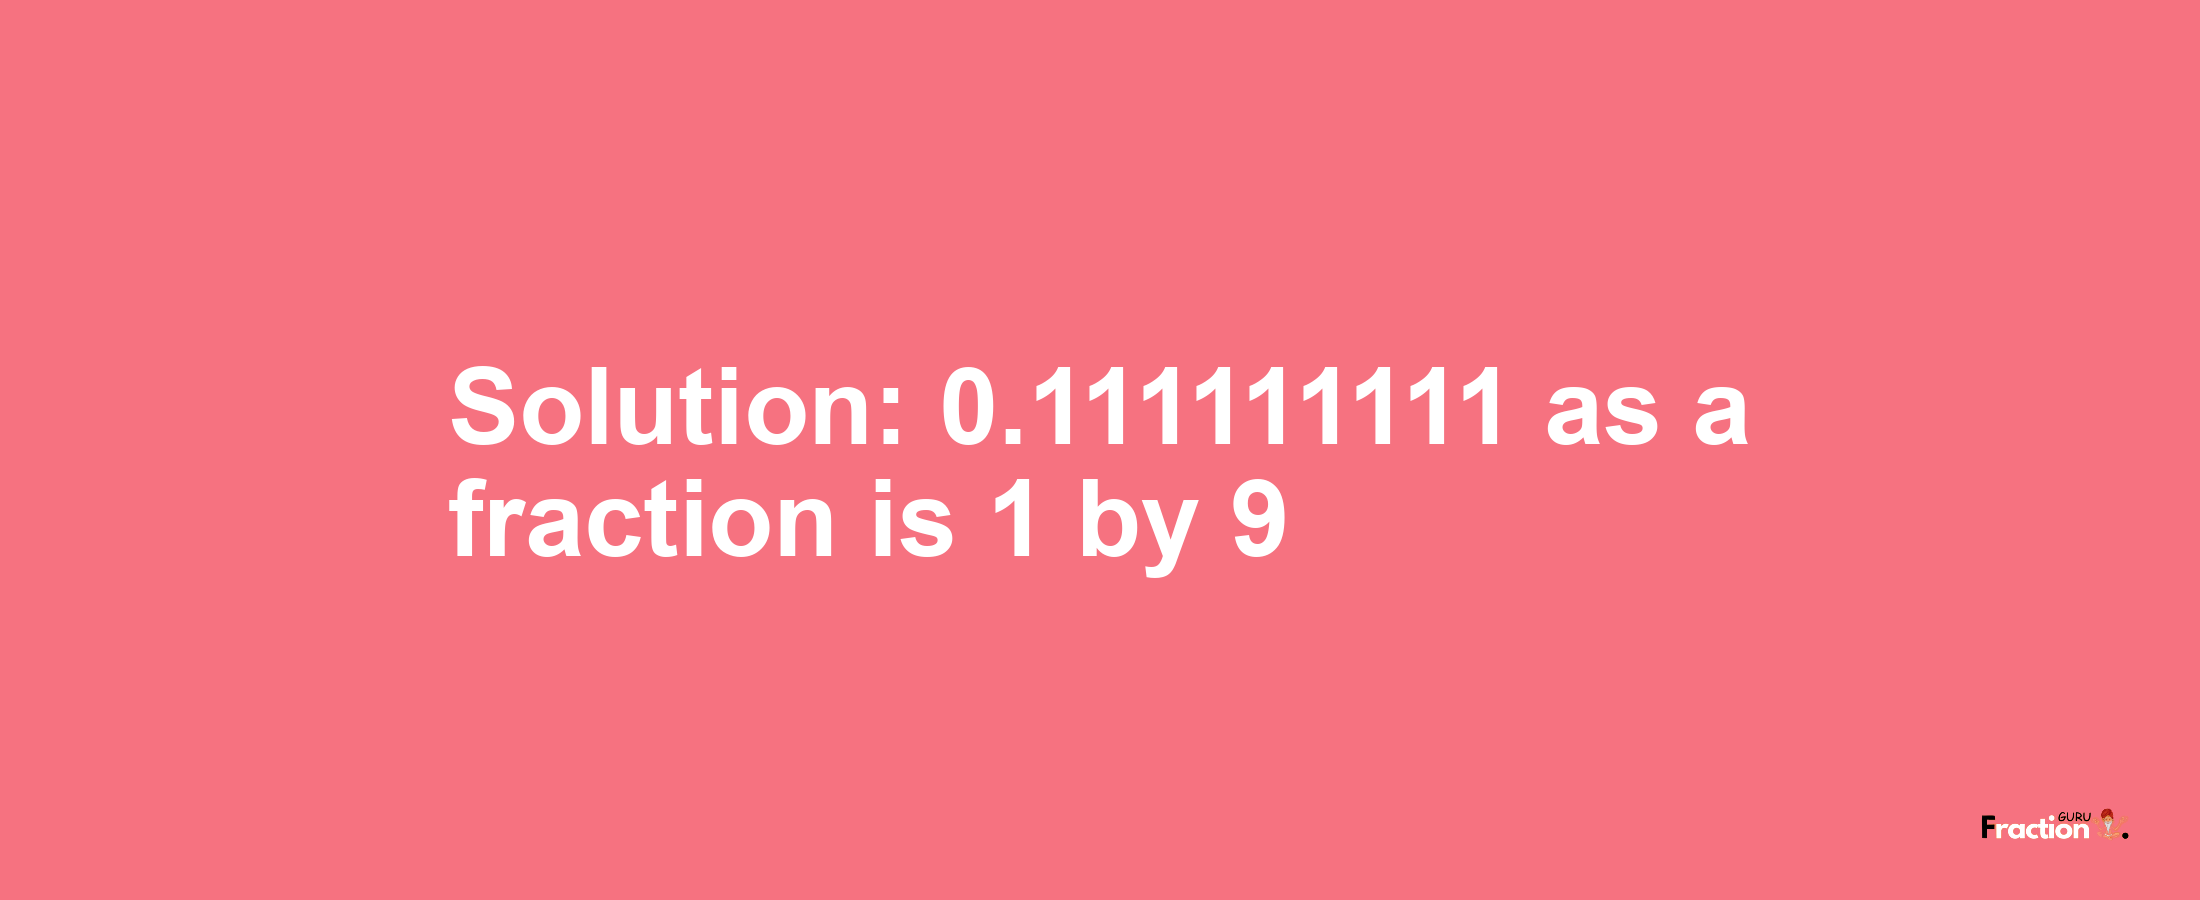 Solution:0.111111111 as a fraction is 1/9